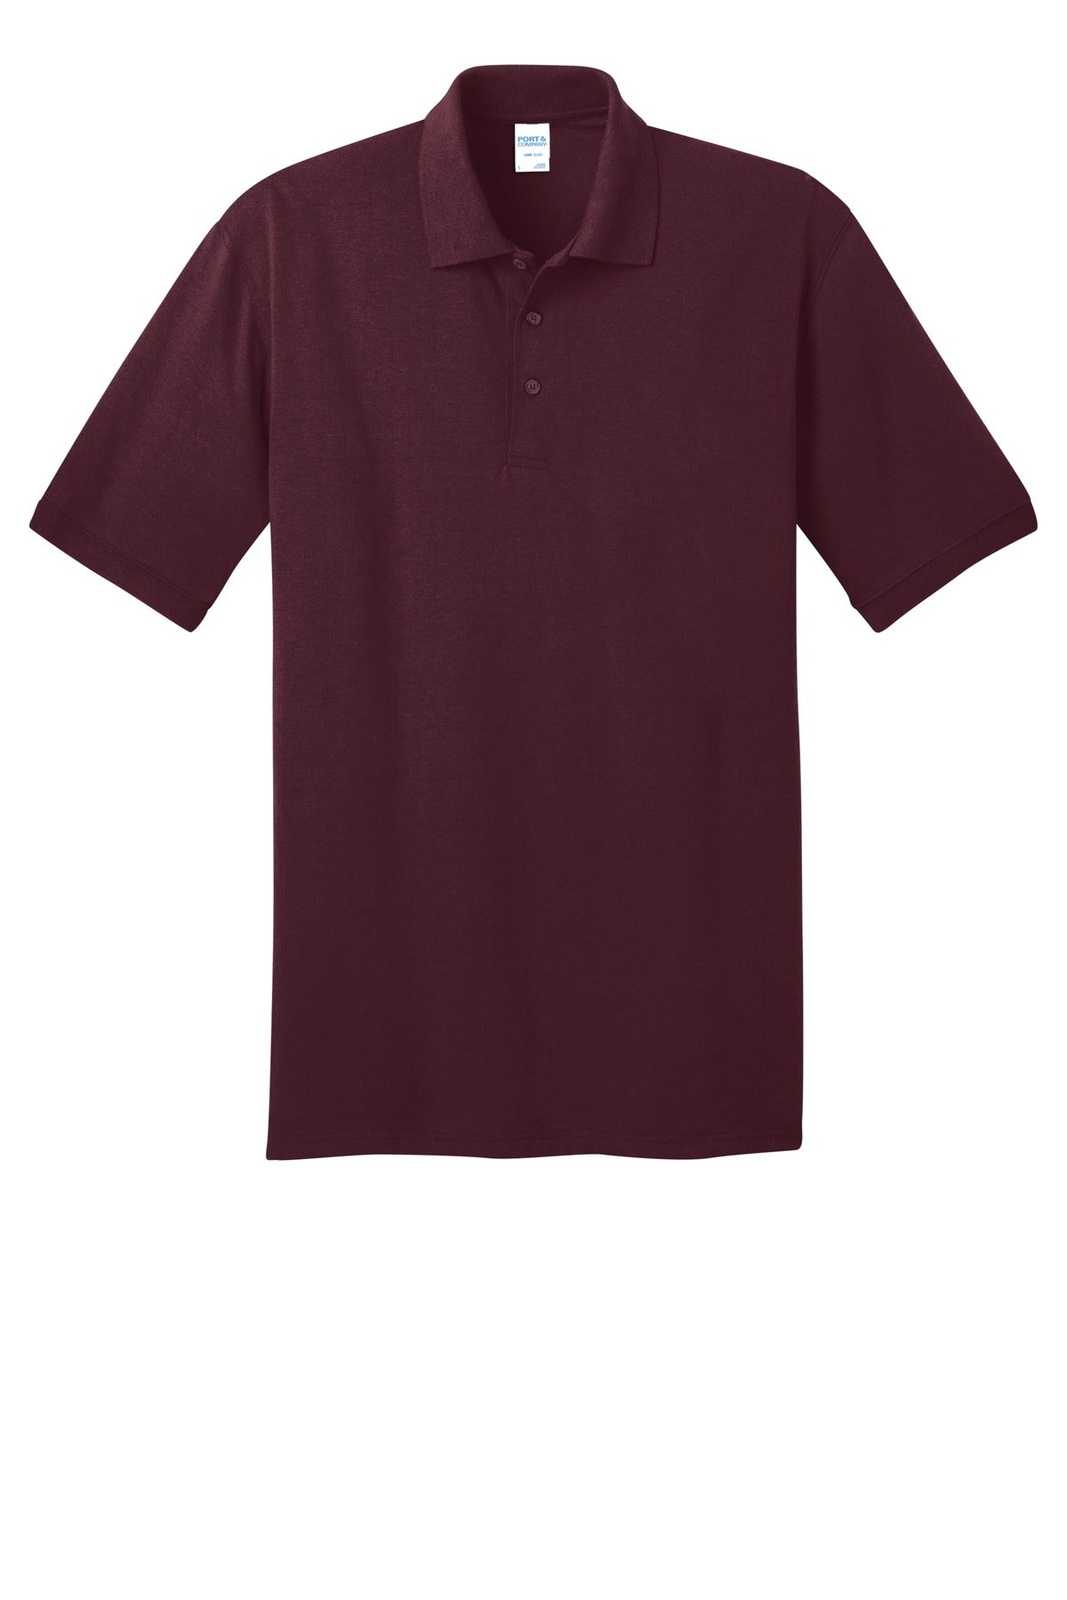 Port &amp; Company KP55 Core Blend Jersey Knit Polo - Athletic Maroon - HIT a Double - 5